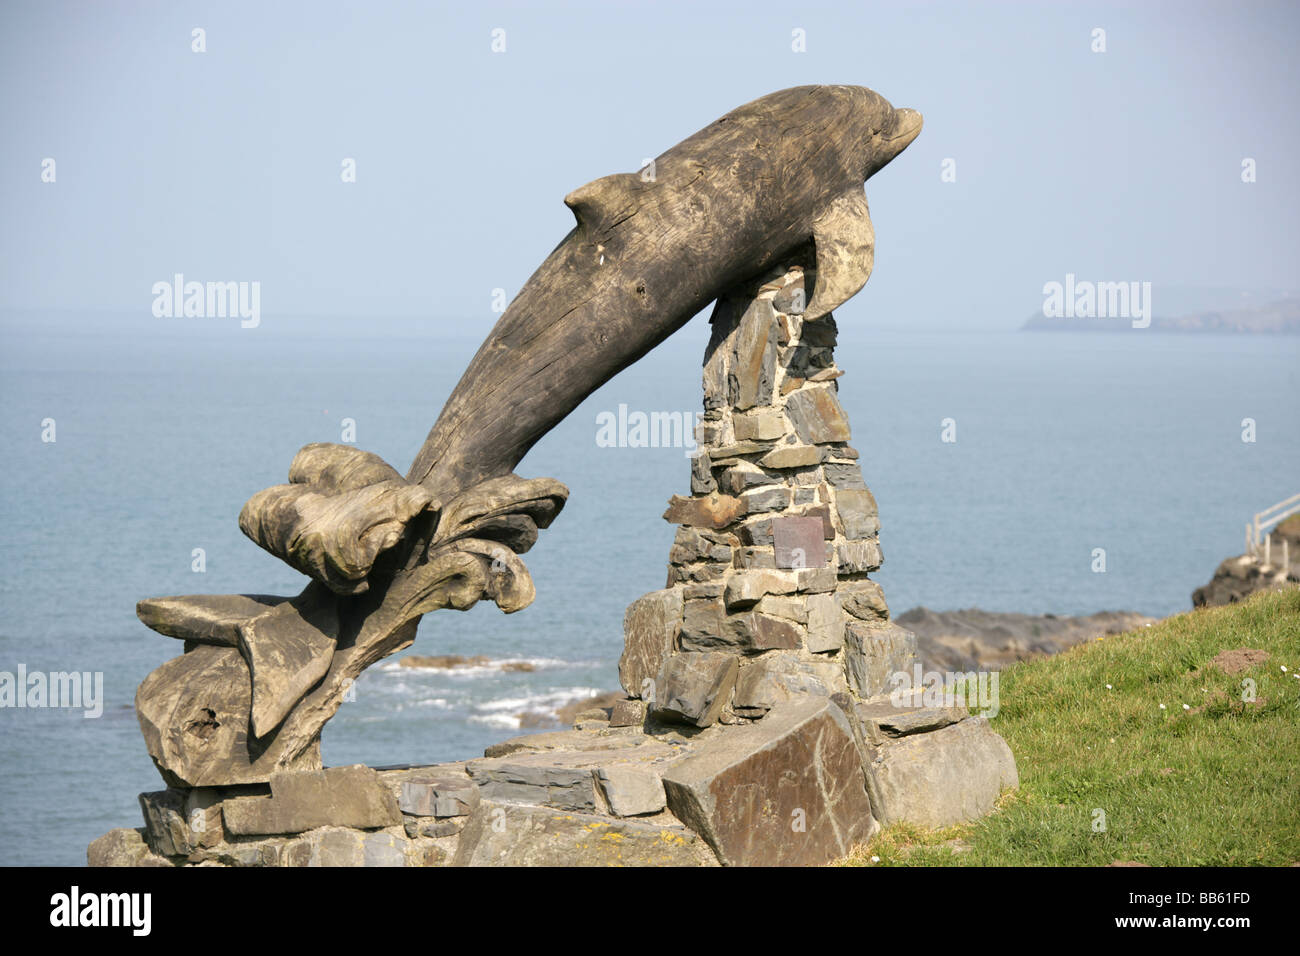 Village of Aberporth, Wales. The Paul Clarke designed and carved Leaping Dolphin sculpture overlooking Aberporth coastline. Stock Photo